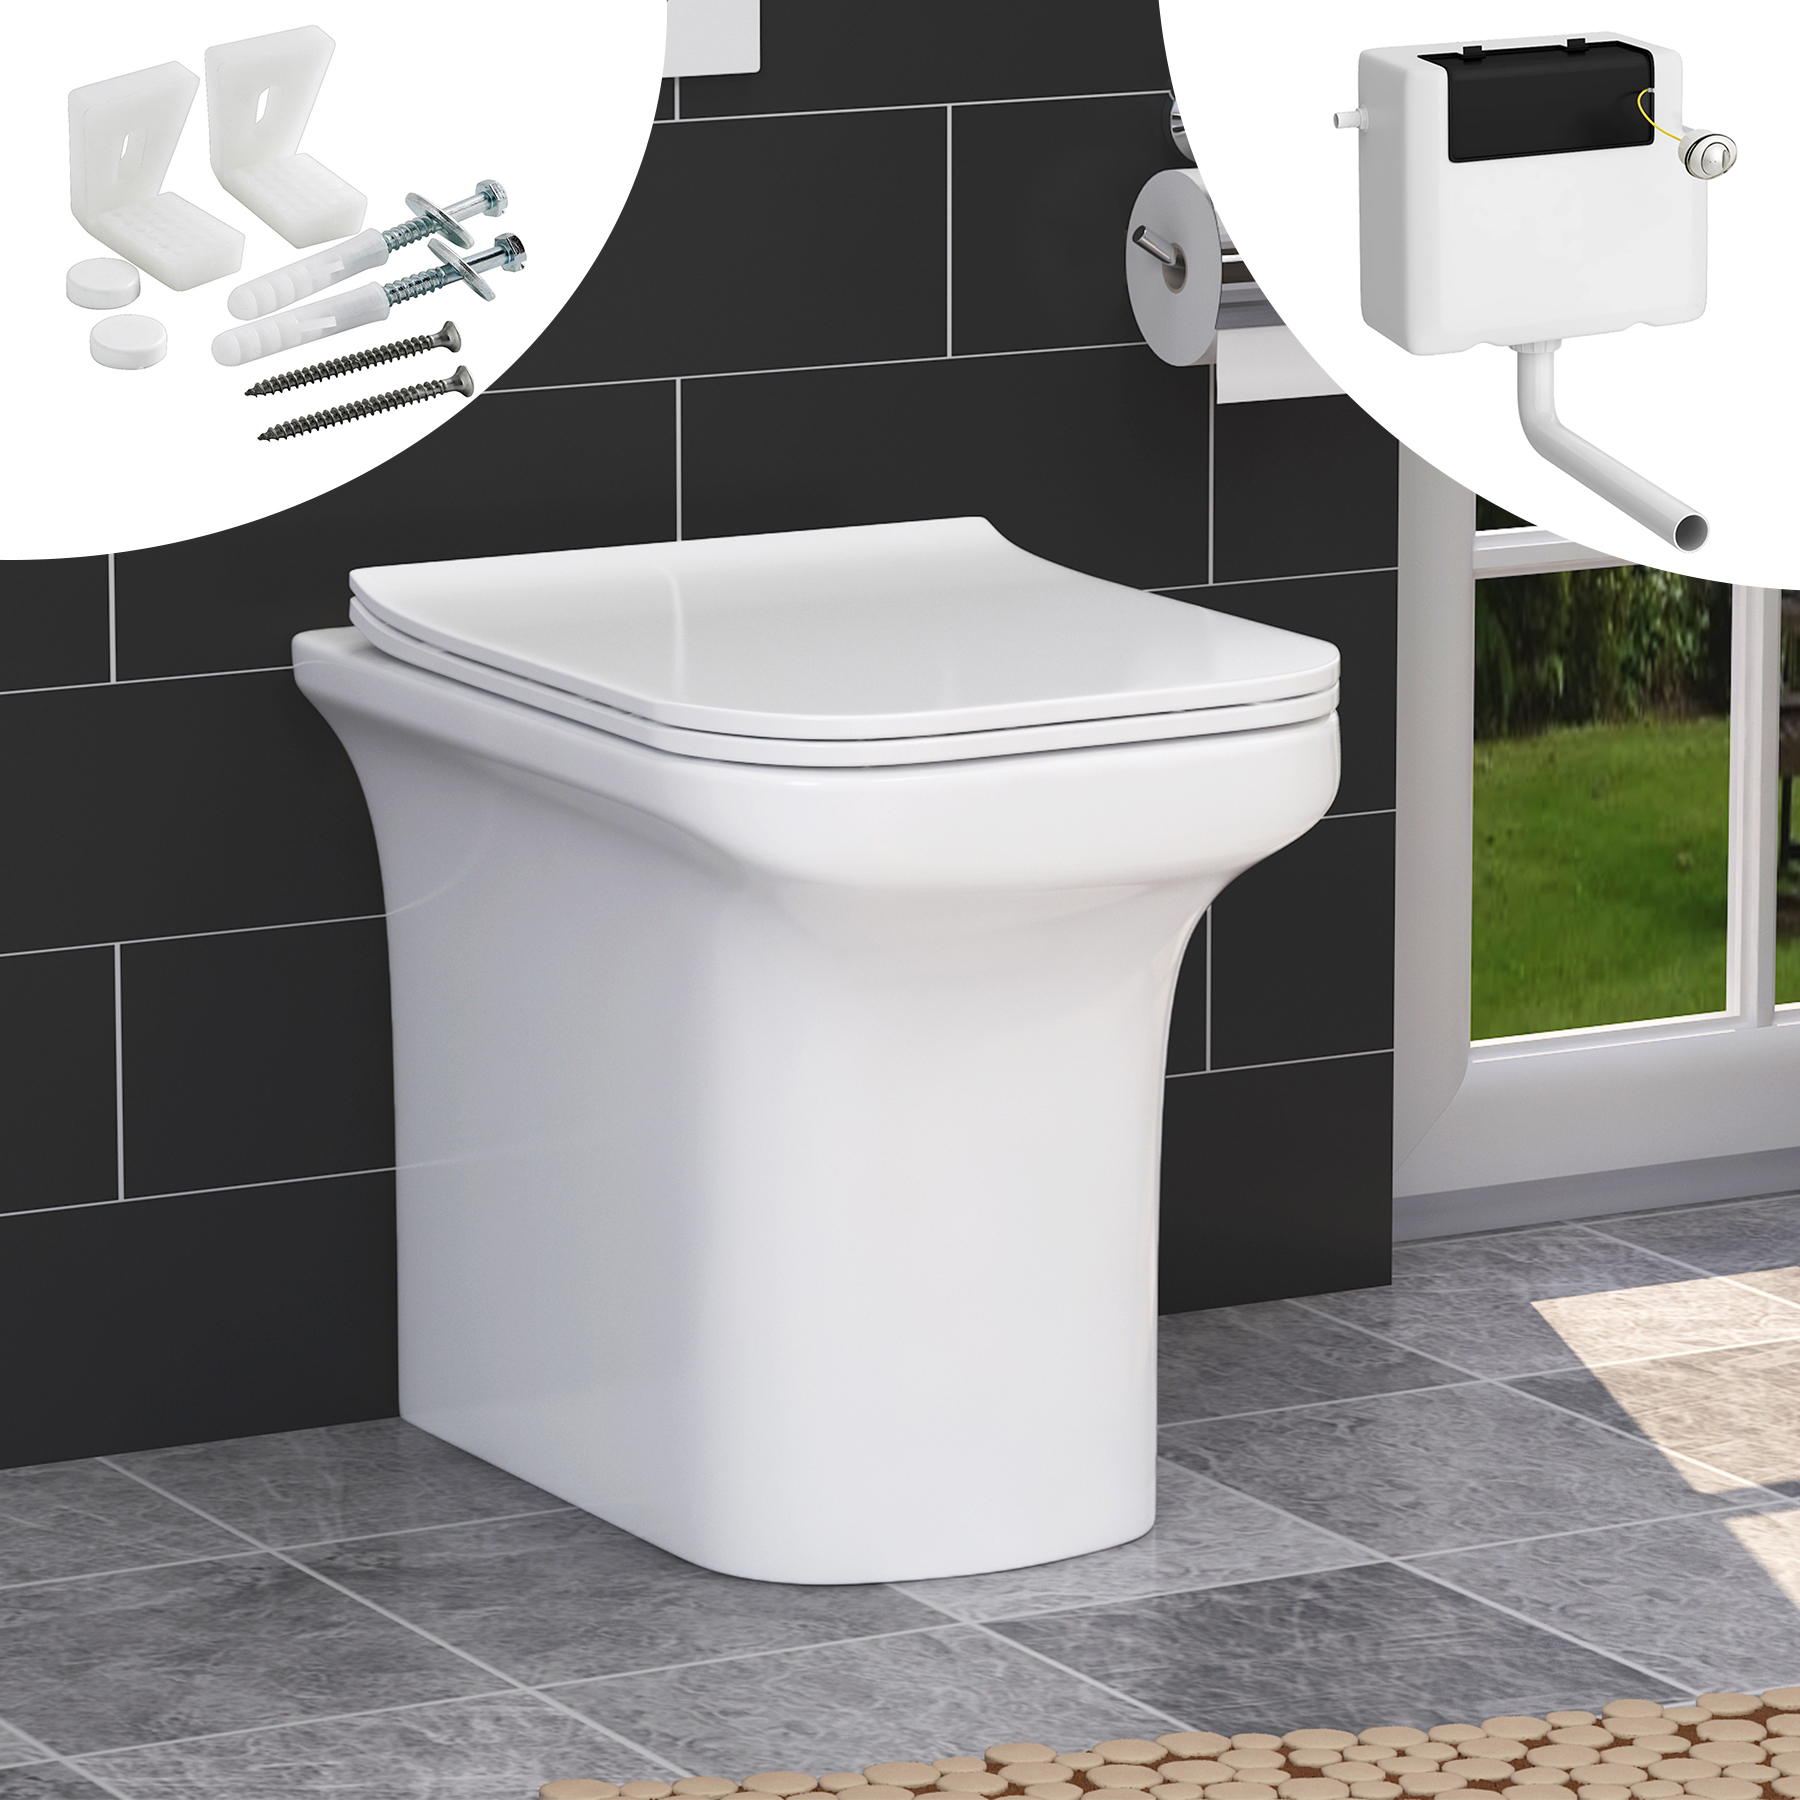 Ceramic BTW Back to Wall Toilet Pan Soft Close Seat & Concealed Cistern Crosby eBay